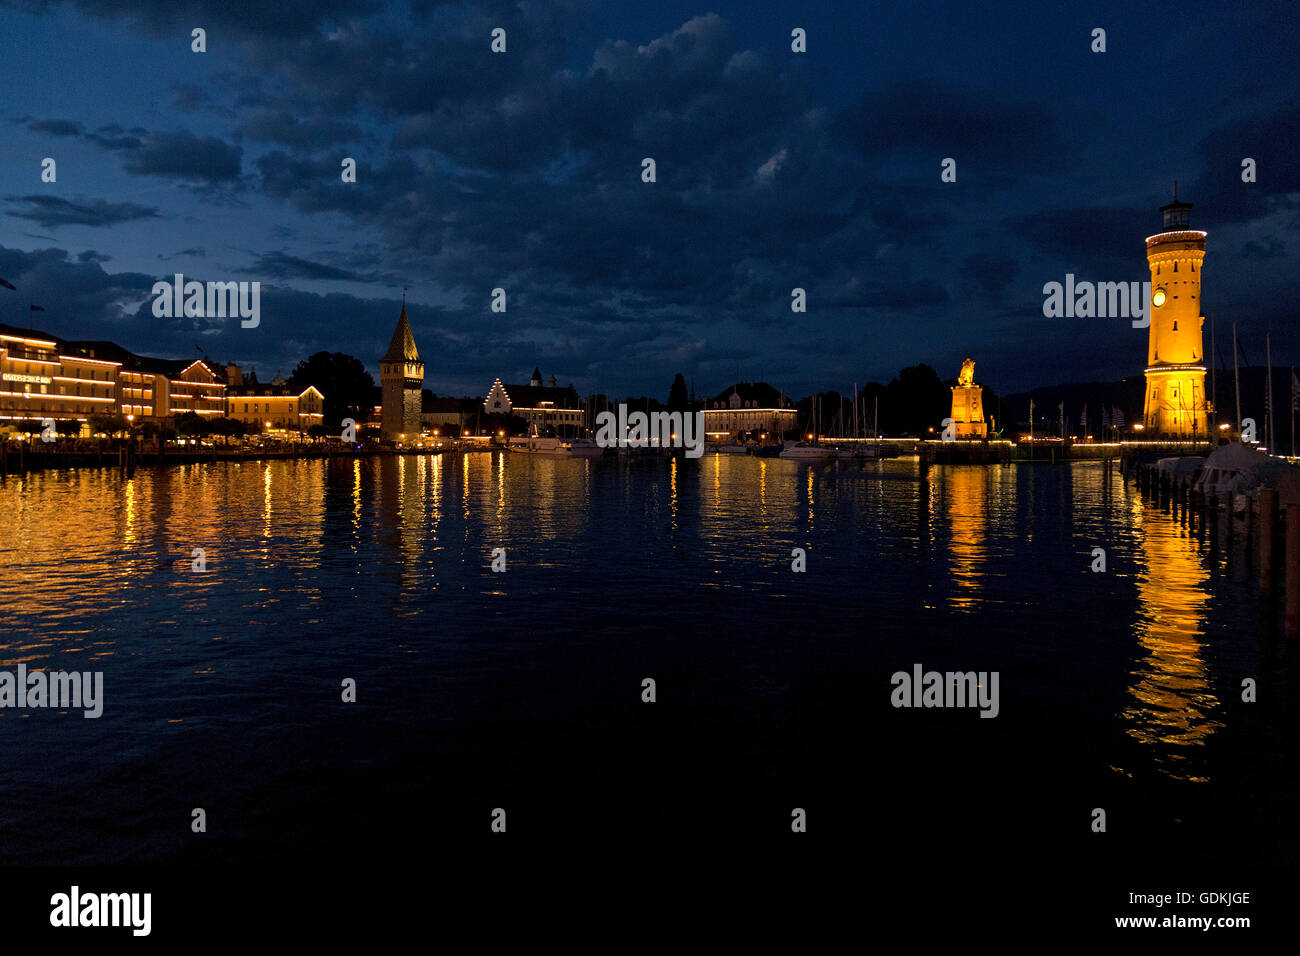 Harbour in the evening, Lindau, Lake Constance, Bavaria, Germany Stock Photo